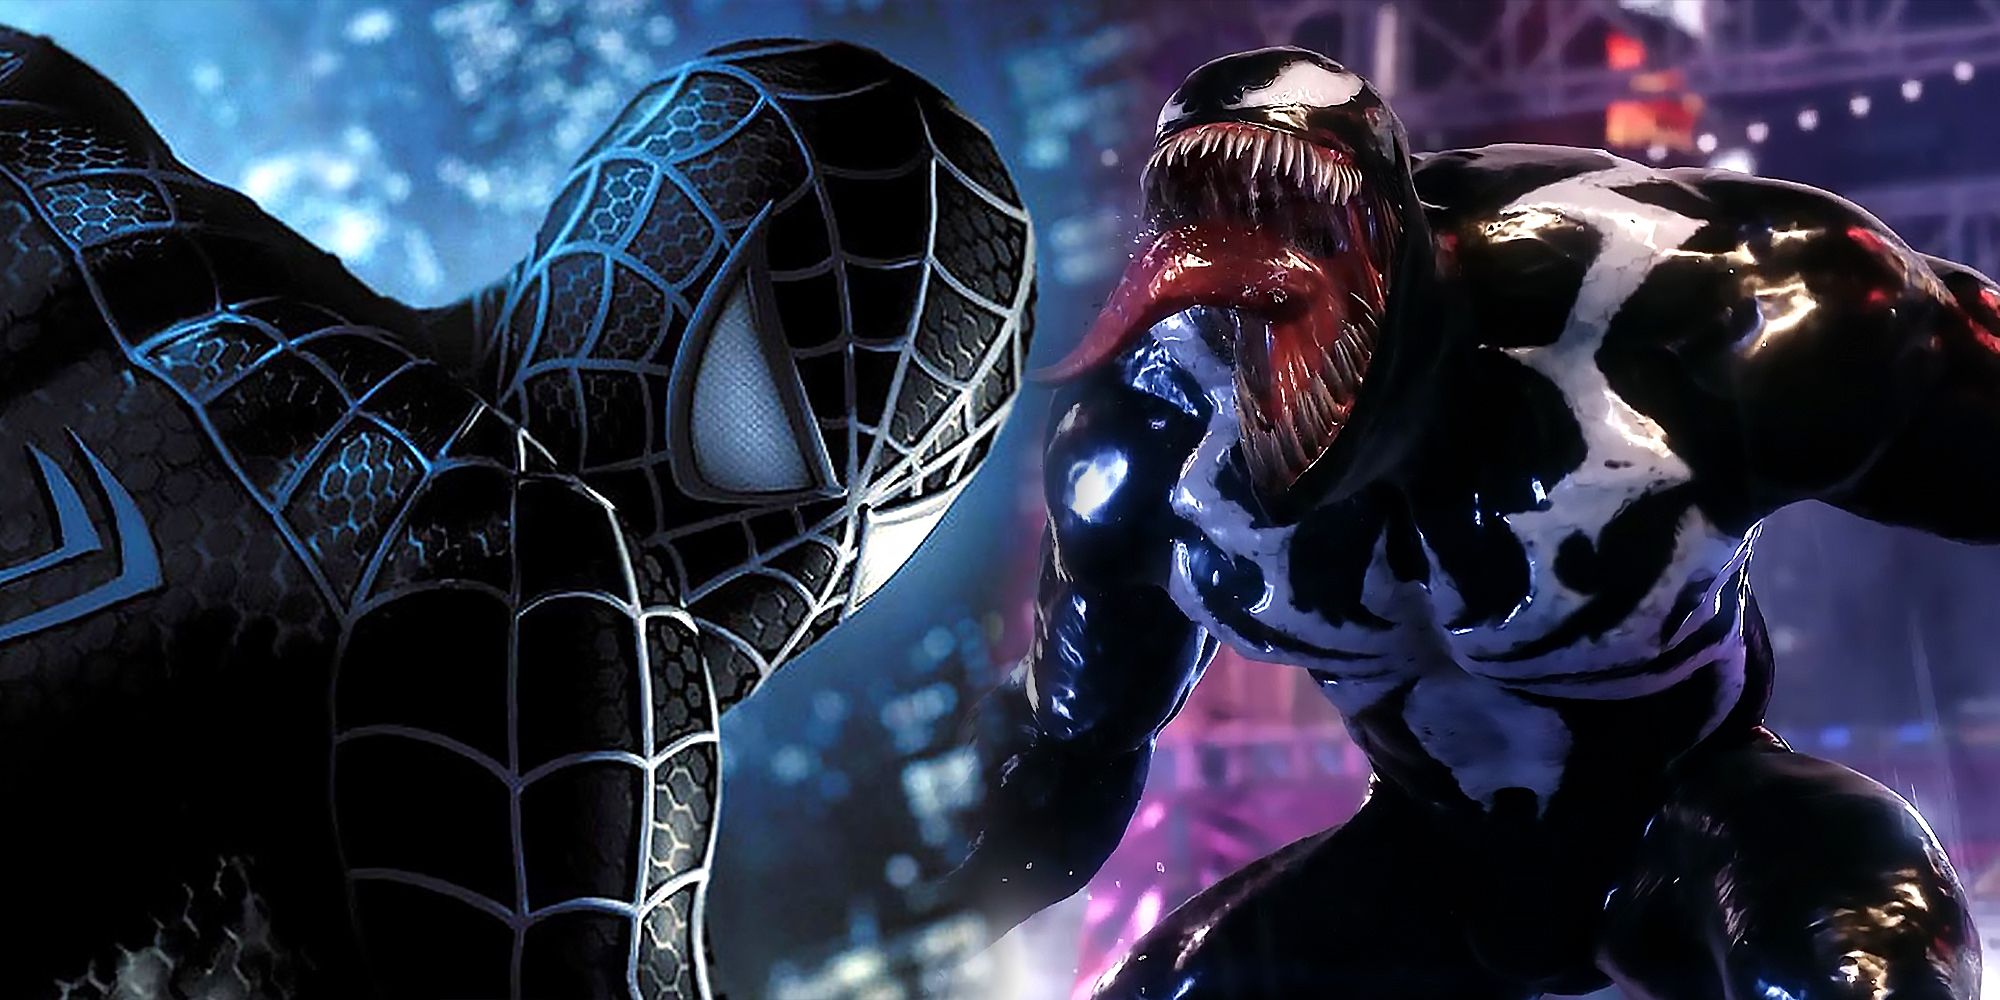 Sony's Spider-Man 3 black suit and Venom from Marvel's Spider-Man 2